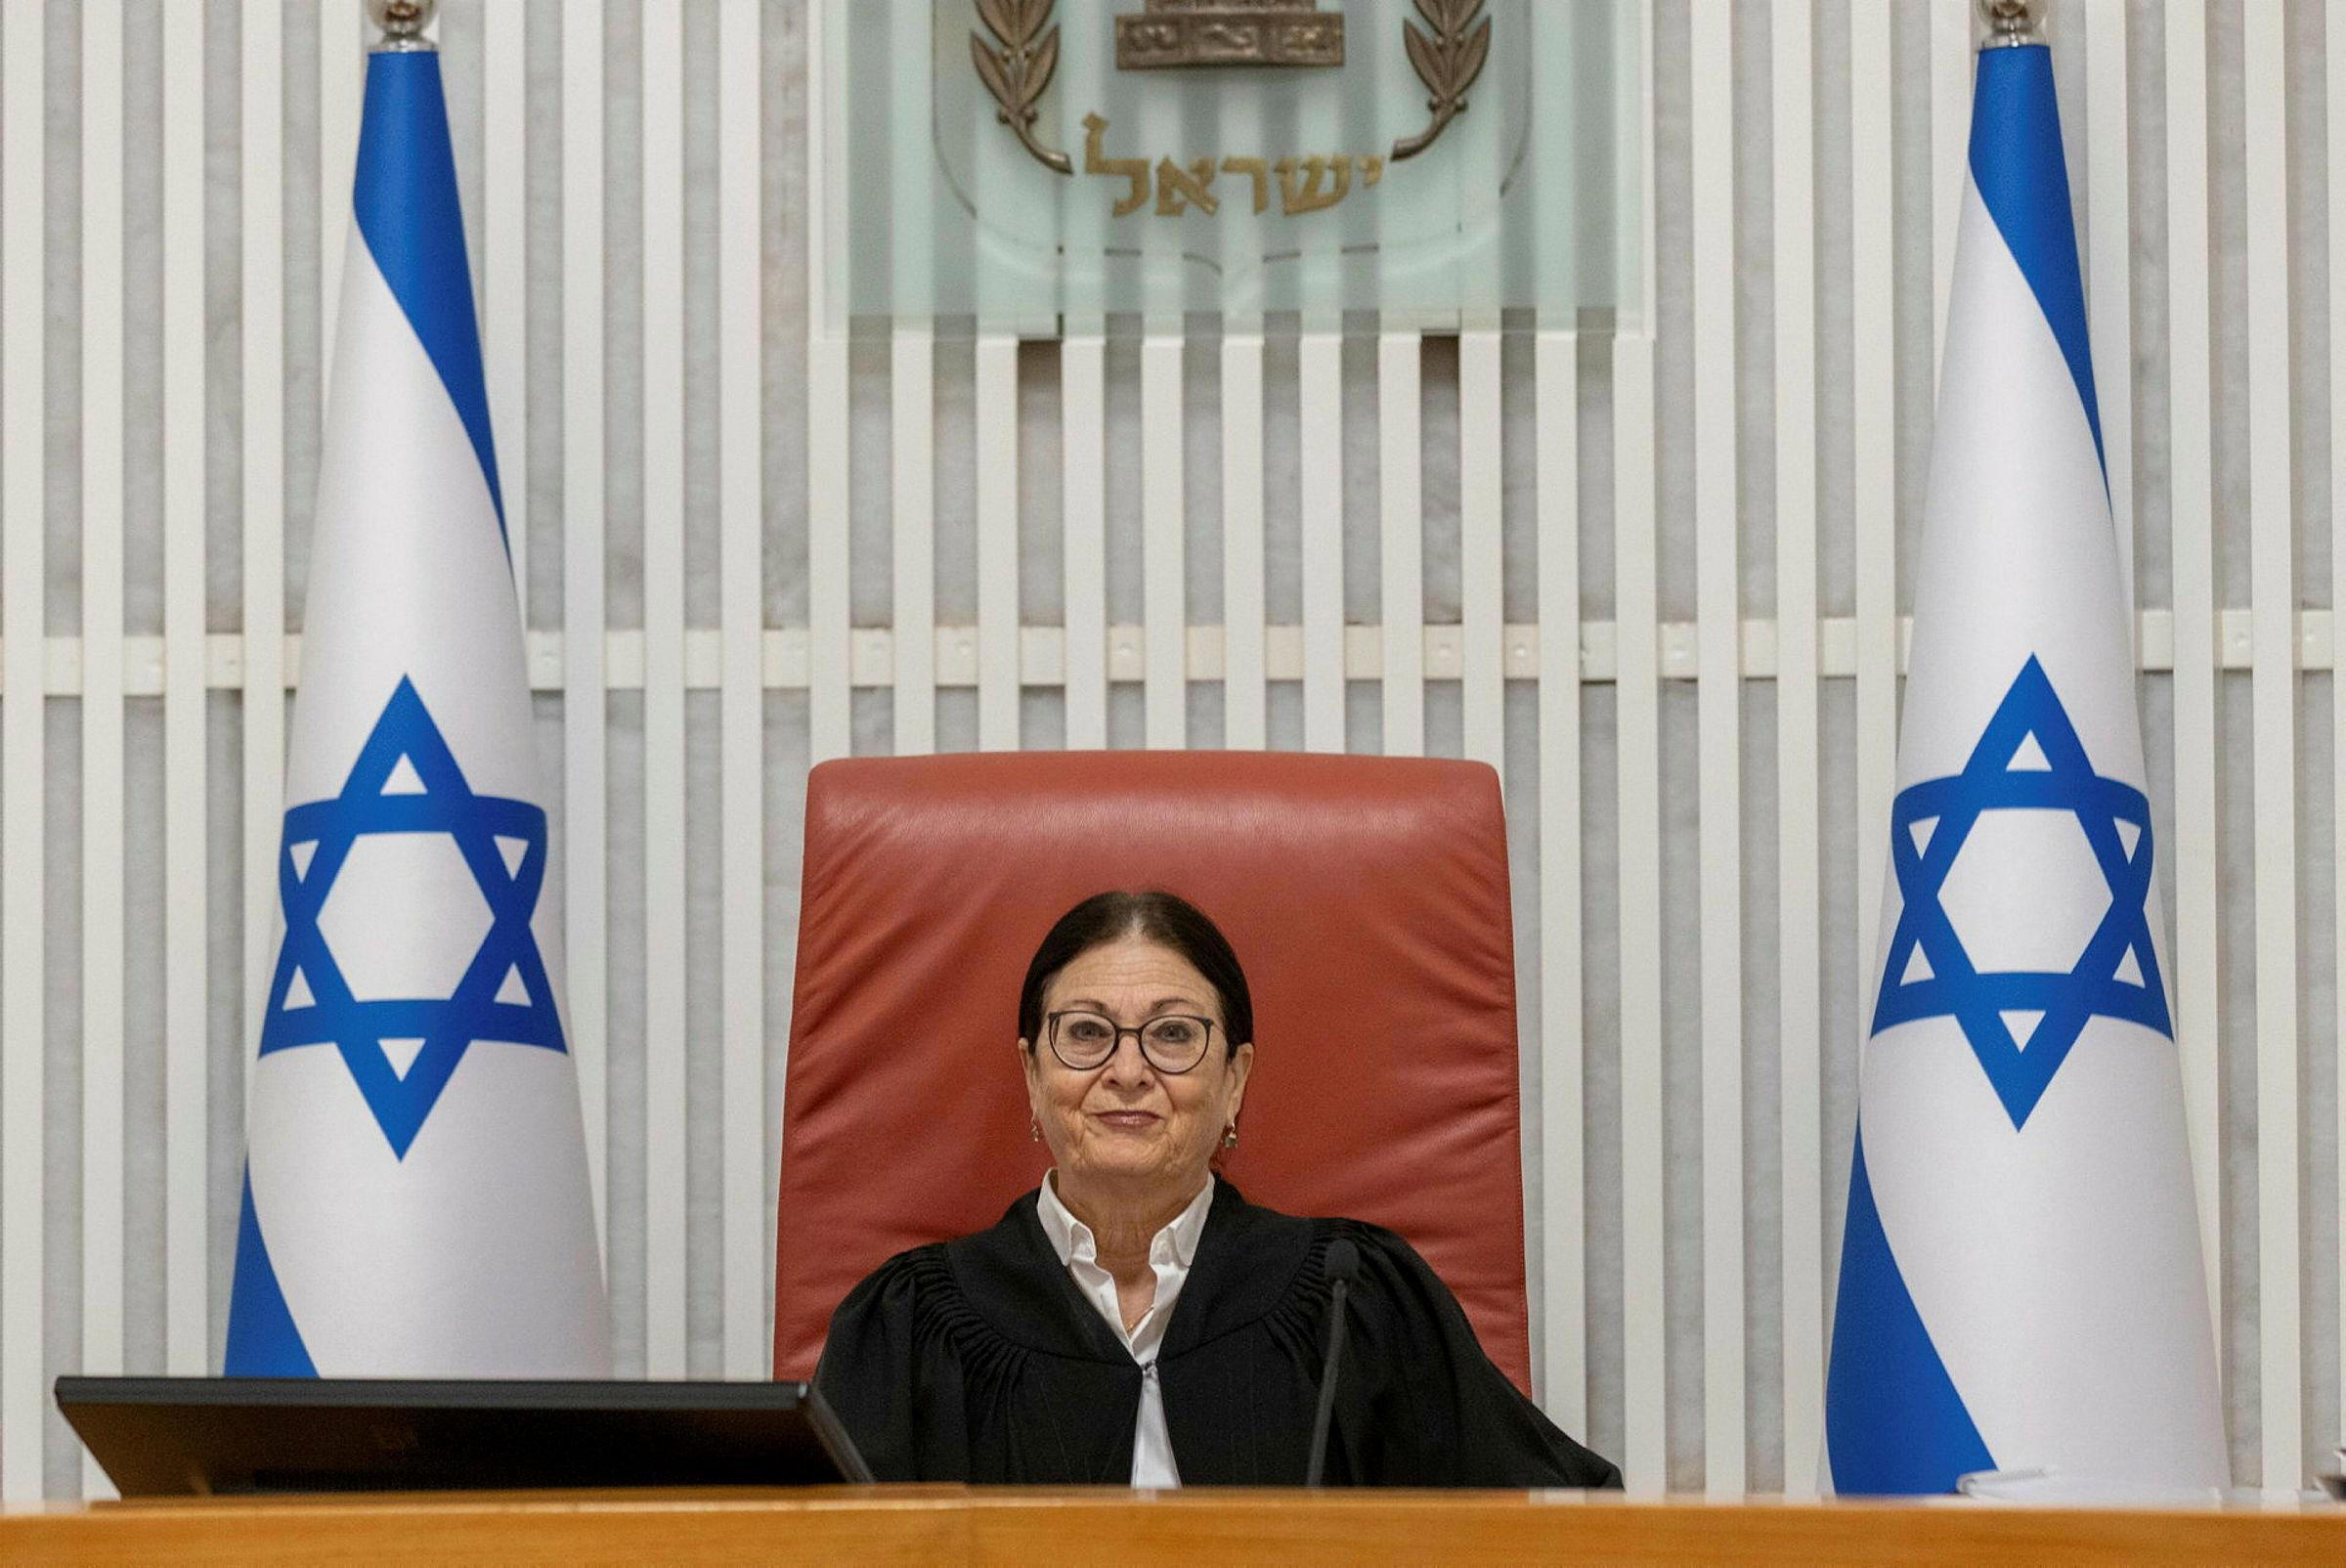 In First All of Israel #39 s Supreme Court Justices Will Hear Petitions on